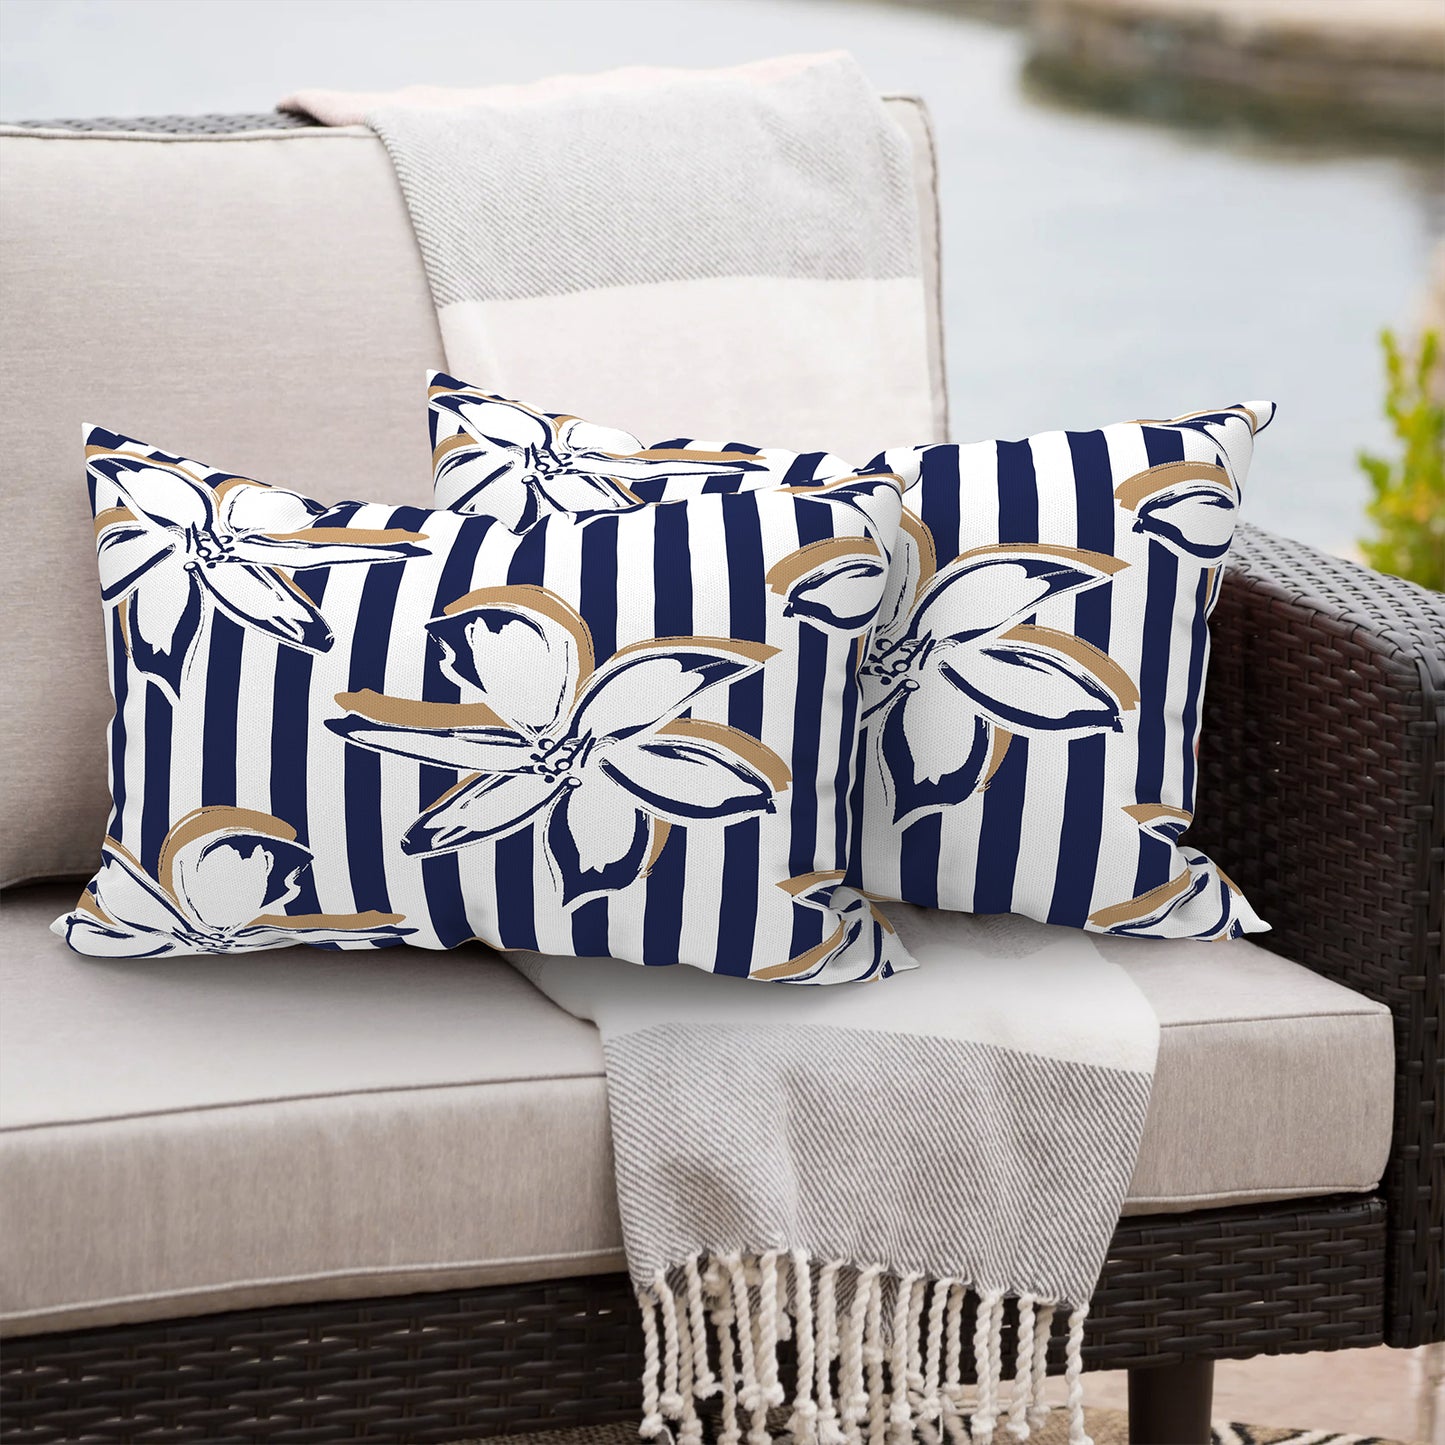 Melody Elephant Outdoor/Indoor Lumbar Pillows, Water Repellent Cushion Pillows, 12x20 Inch, Outdoor Pillows with Inserts for Home Garden, Pack of 2, Clemens Cabana Navy